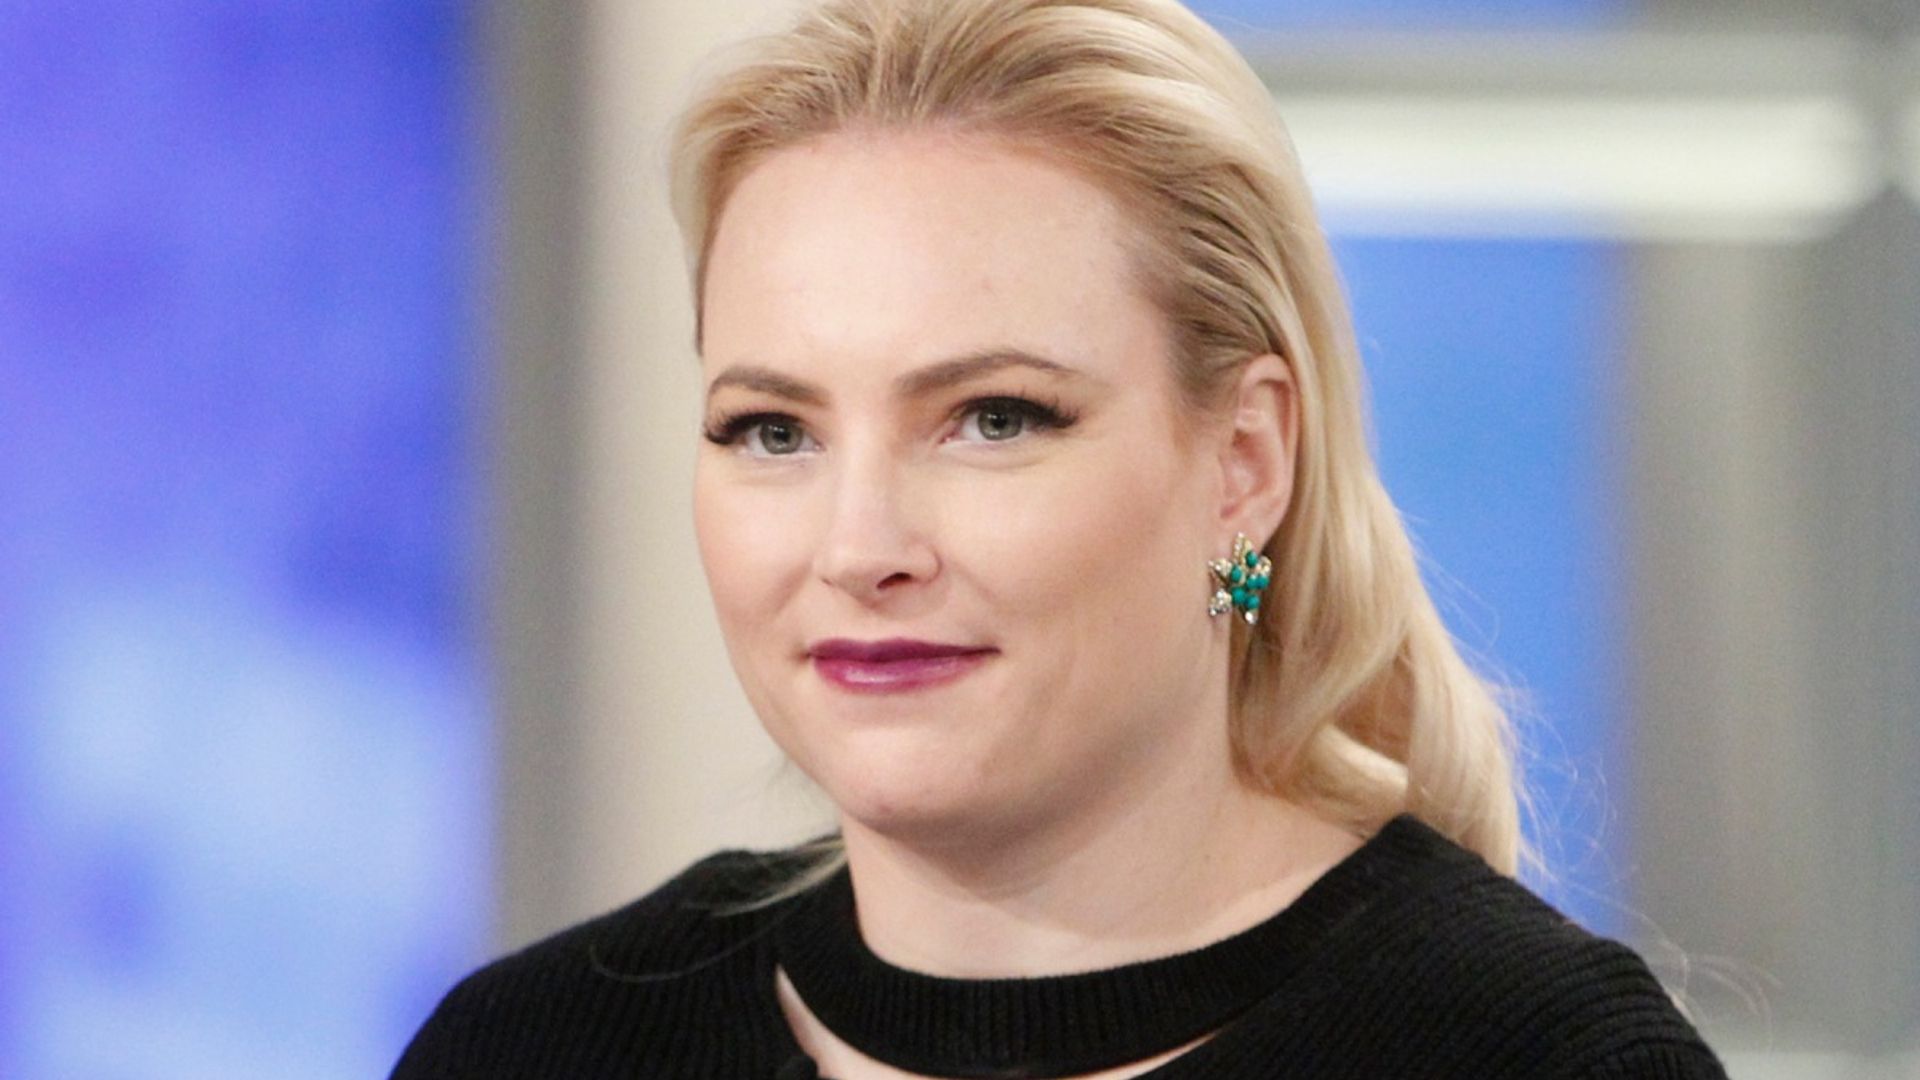 Meghan McCain praised by fans for inspiring words about importance of 'listening to each other'